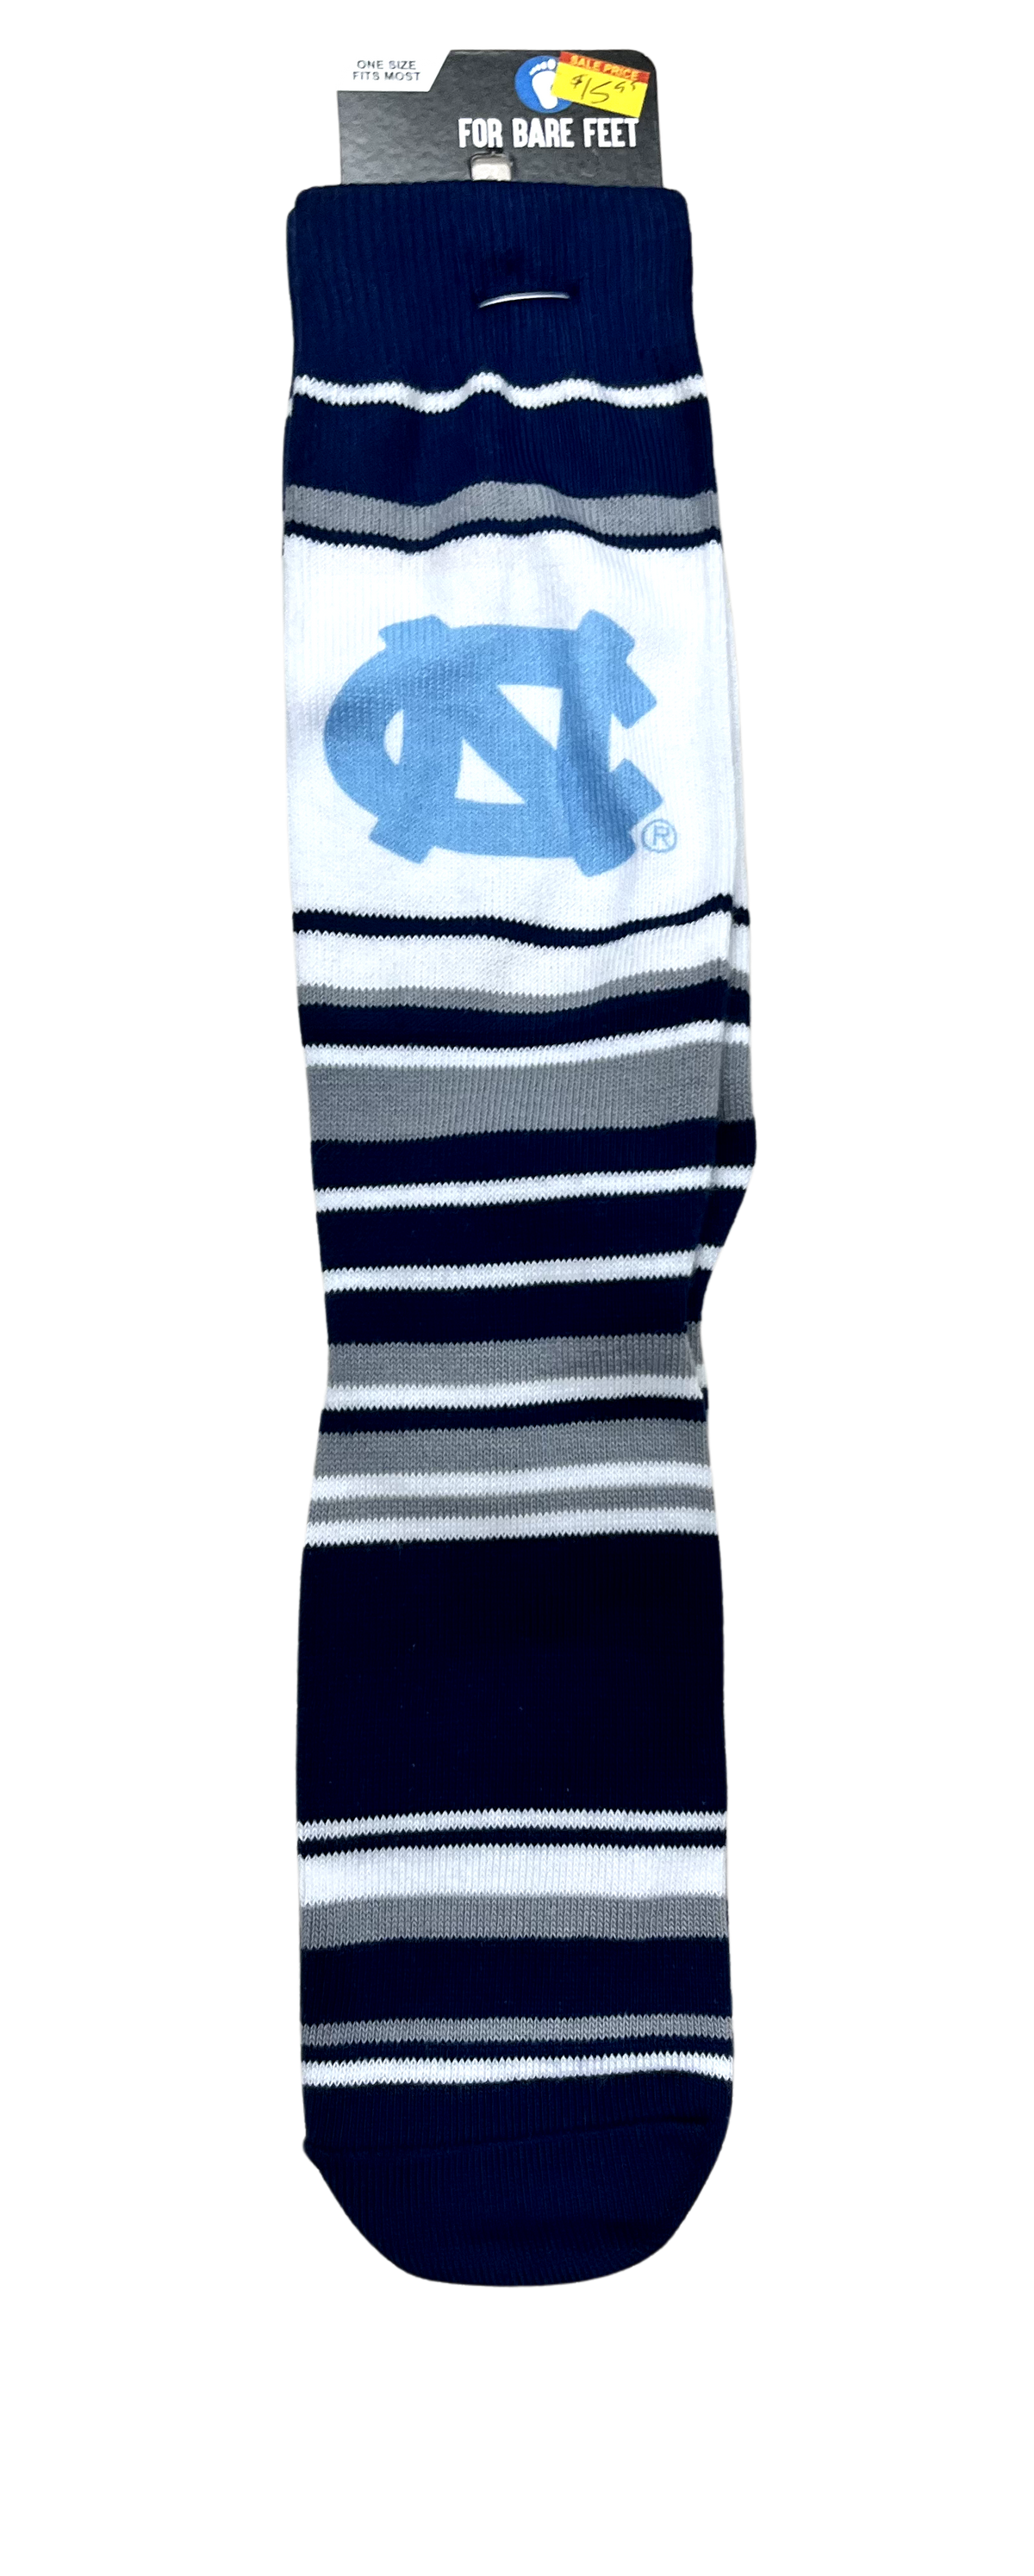 Gray and Navy Striped UNC Socks